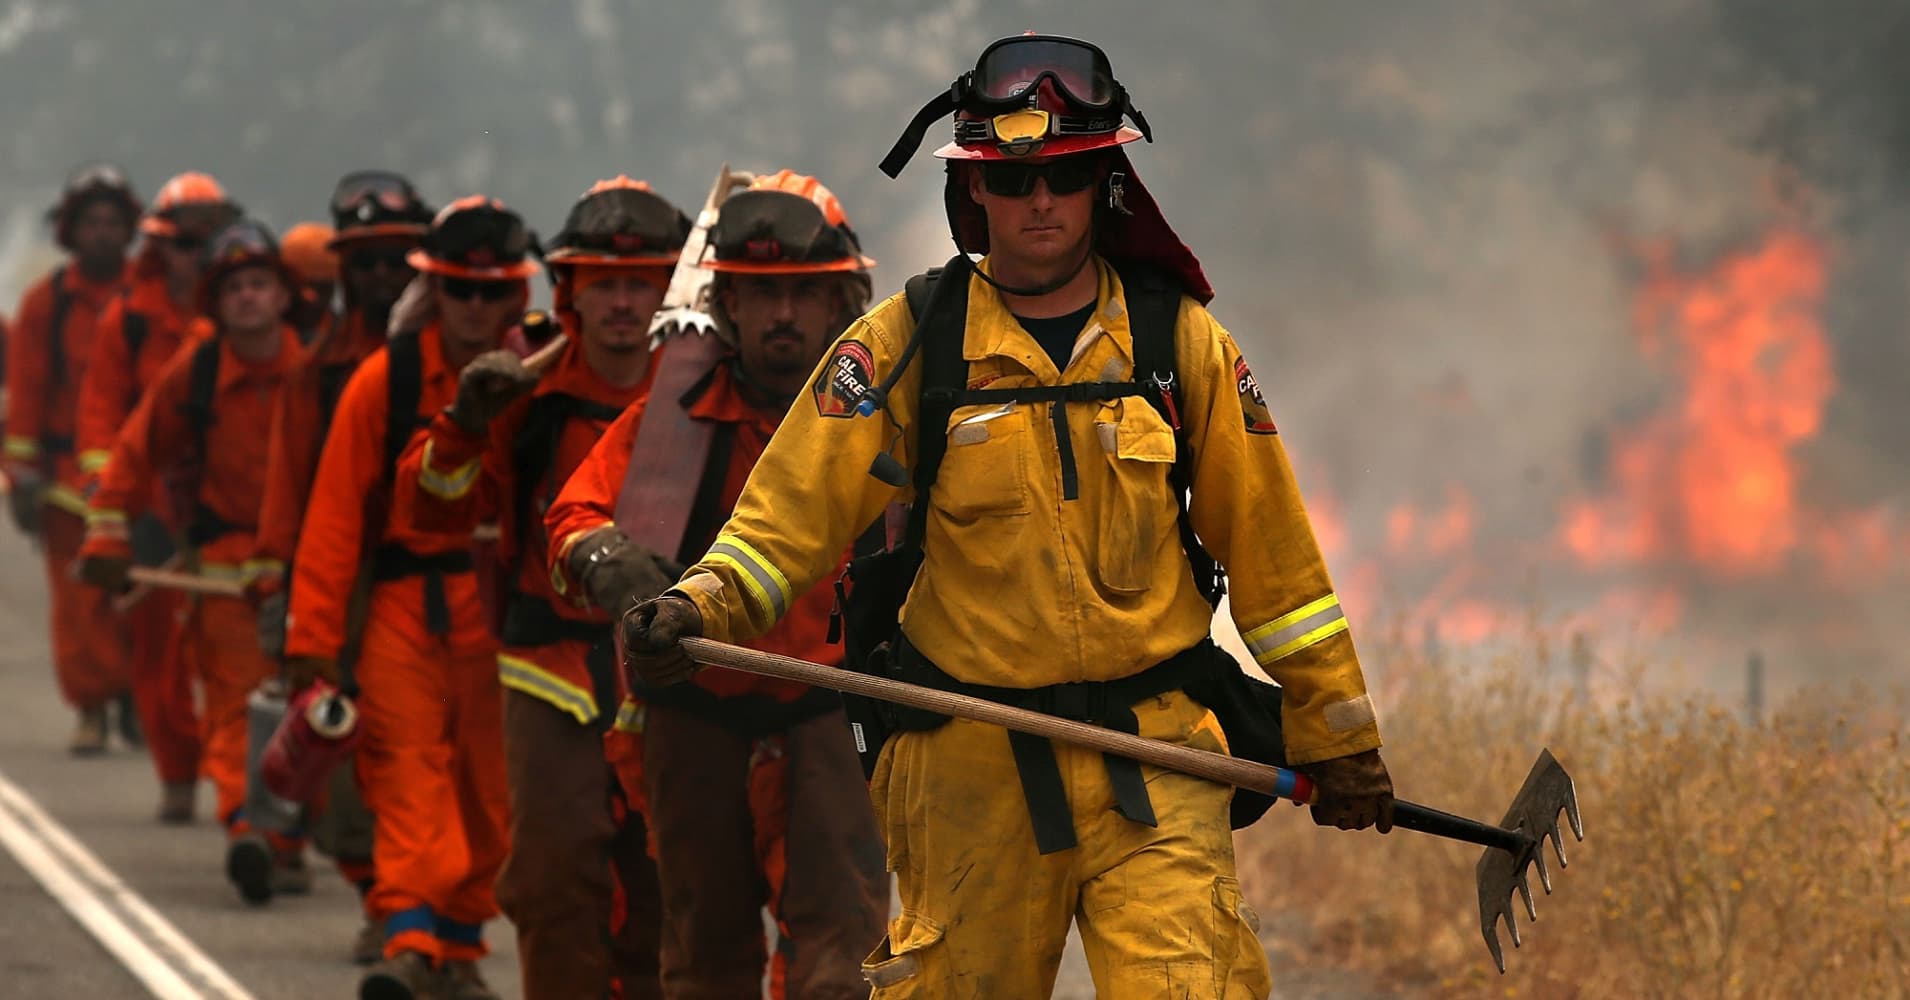 A Cal Fire firefighter leads a group of firefighters during a burn operation.